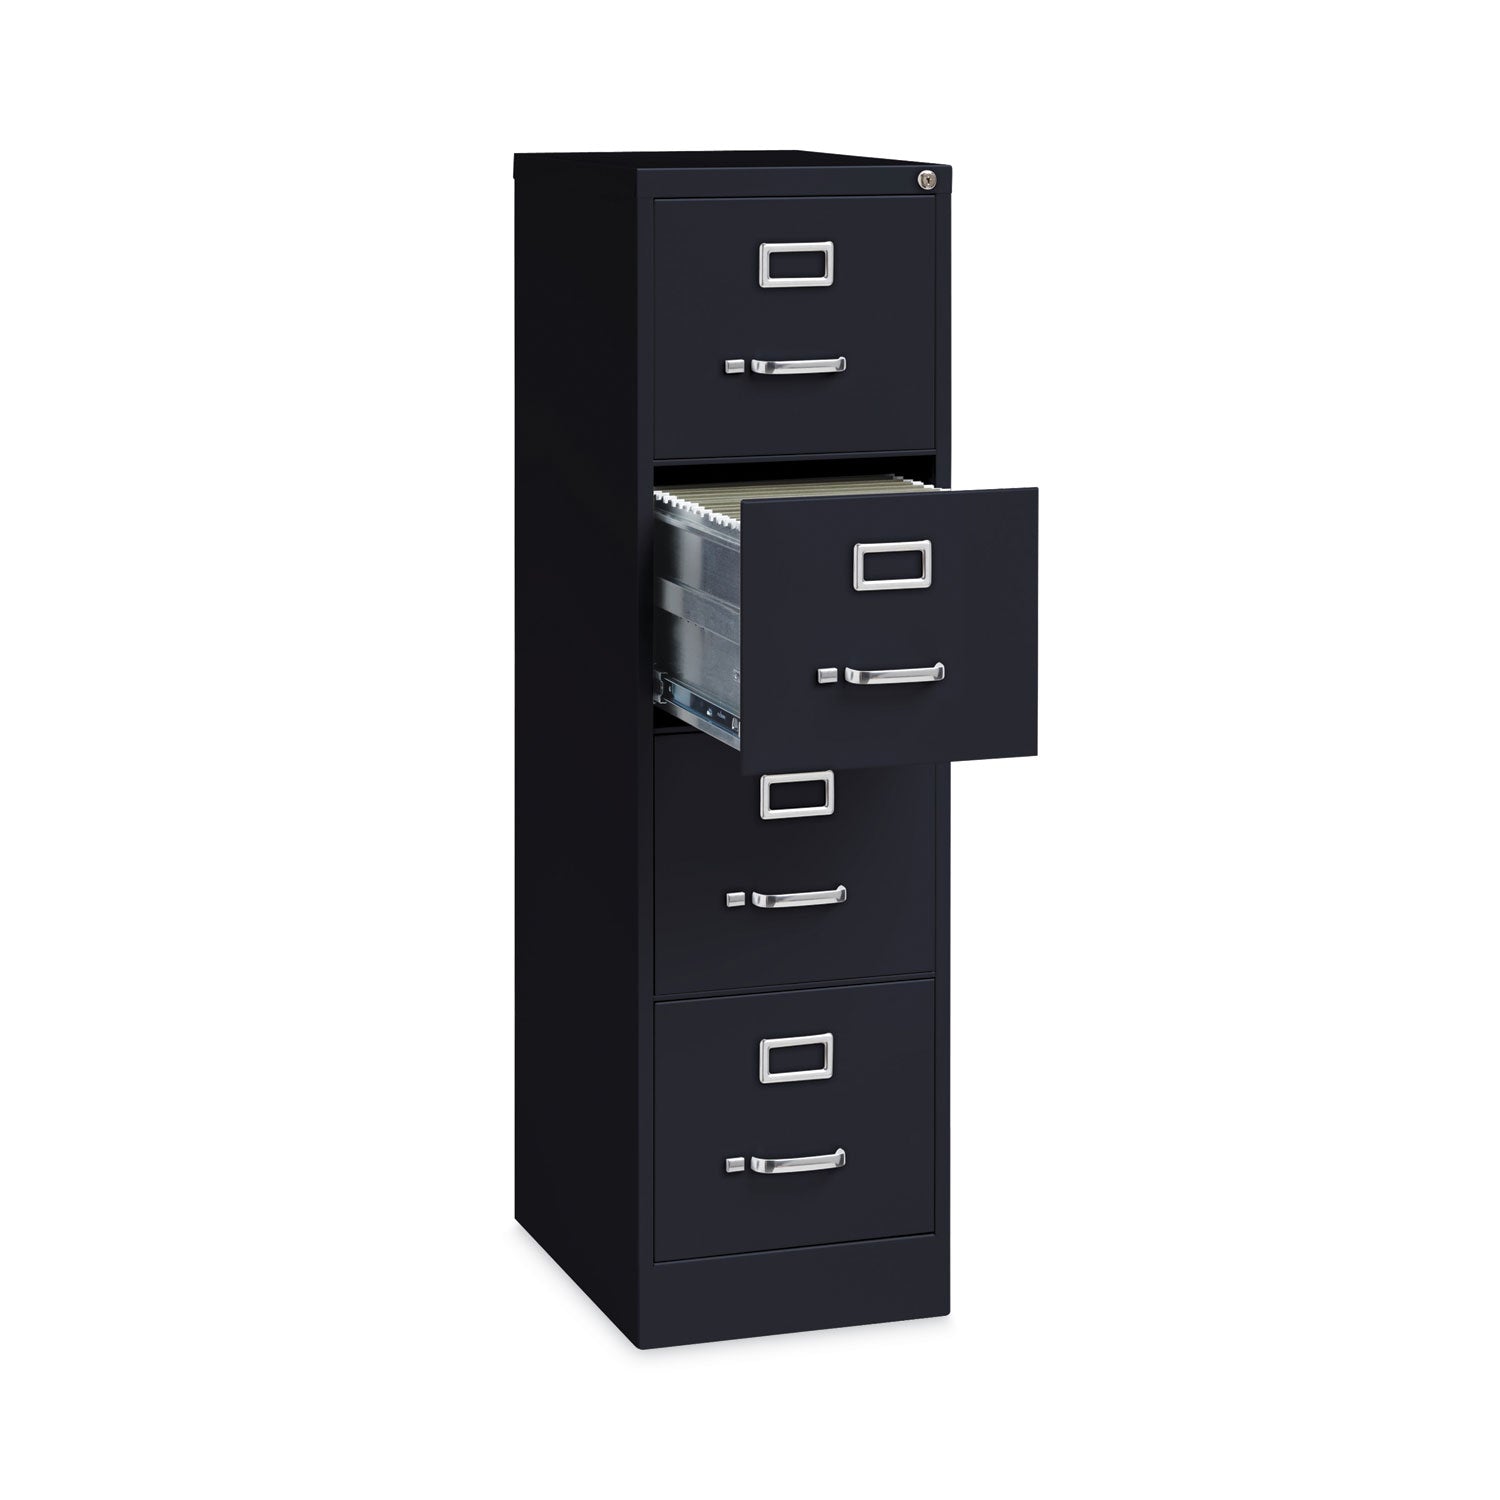 vertical-letter-file-cabinet-4-letter-size-file-drawers-black-15-x-22-x-52_hid17892 - 4